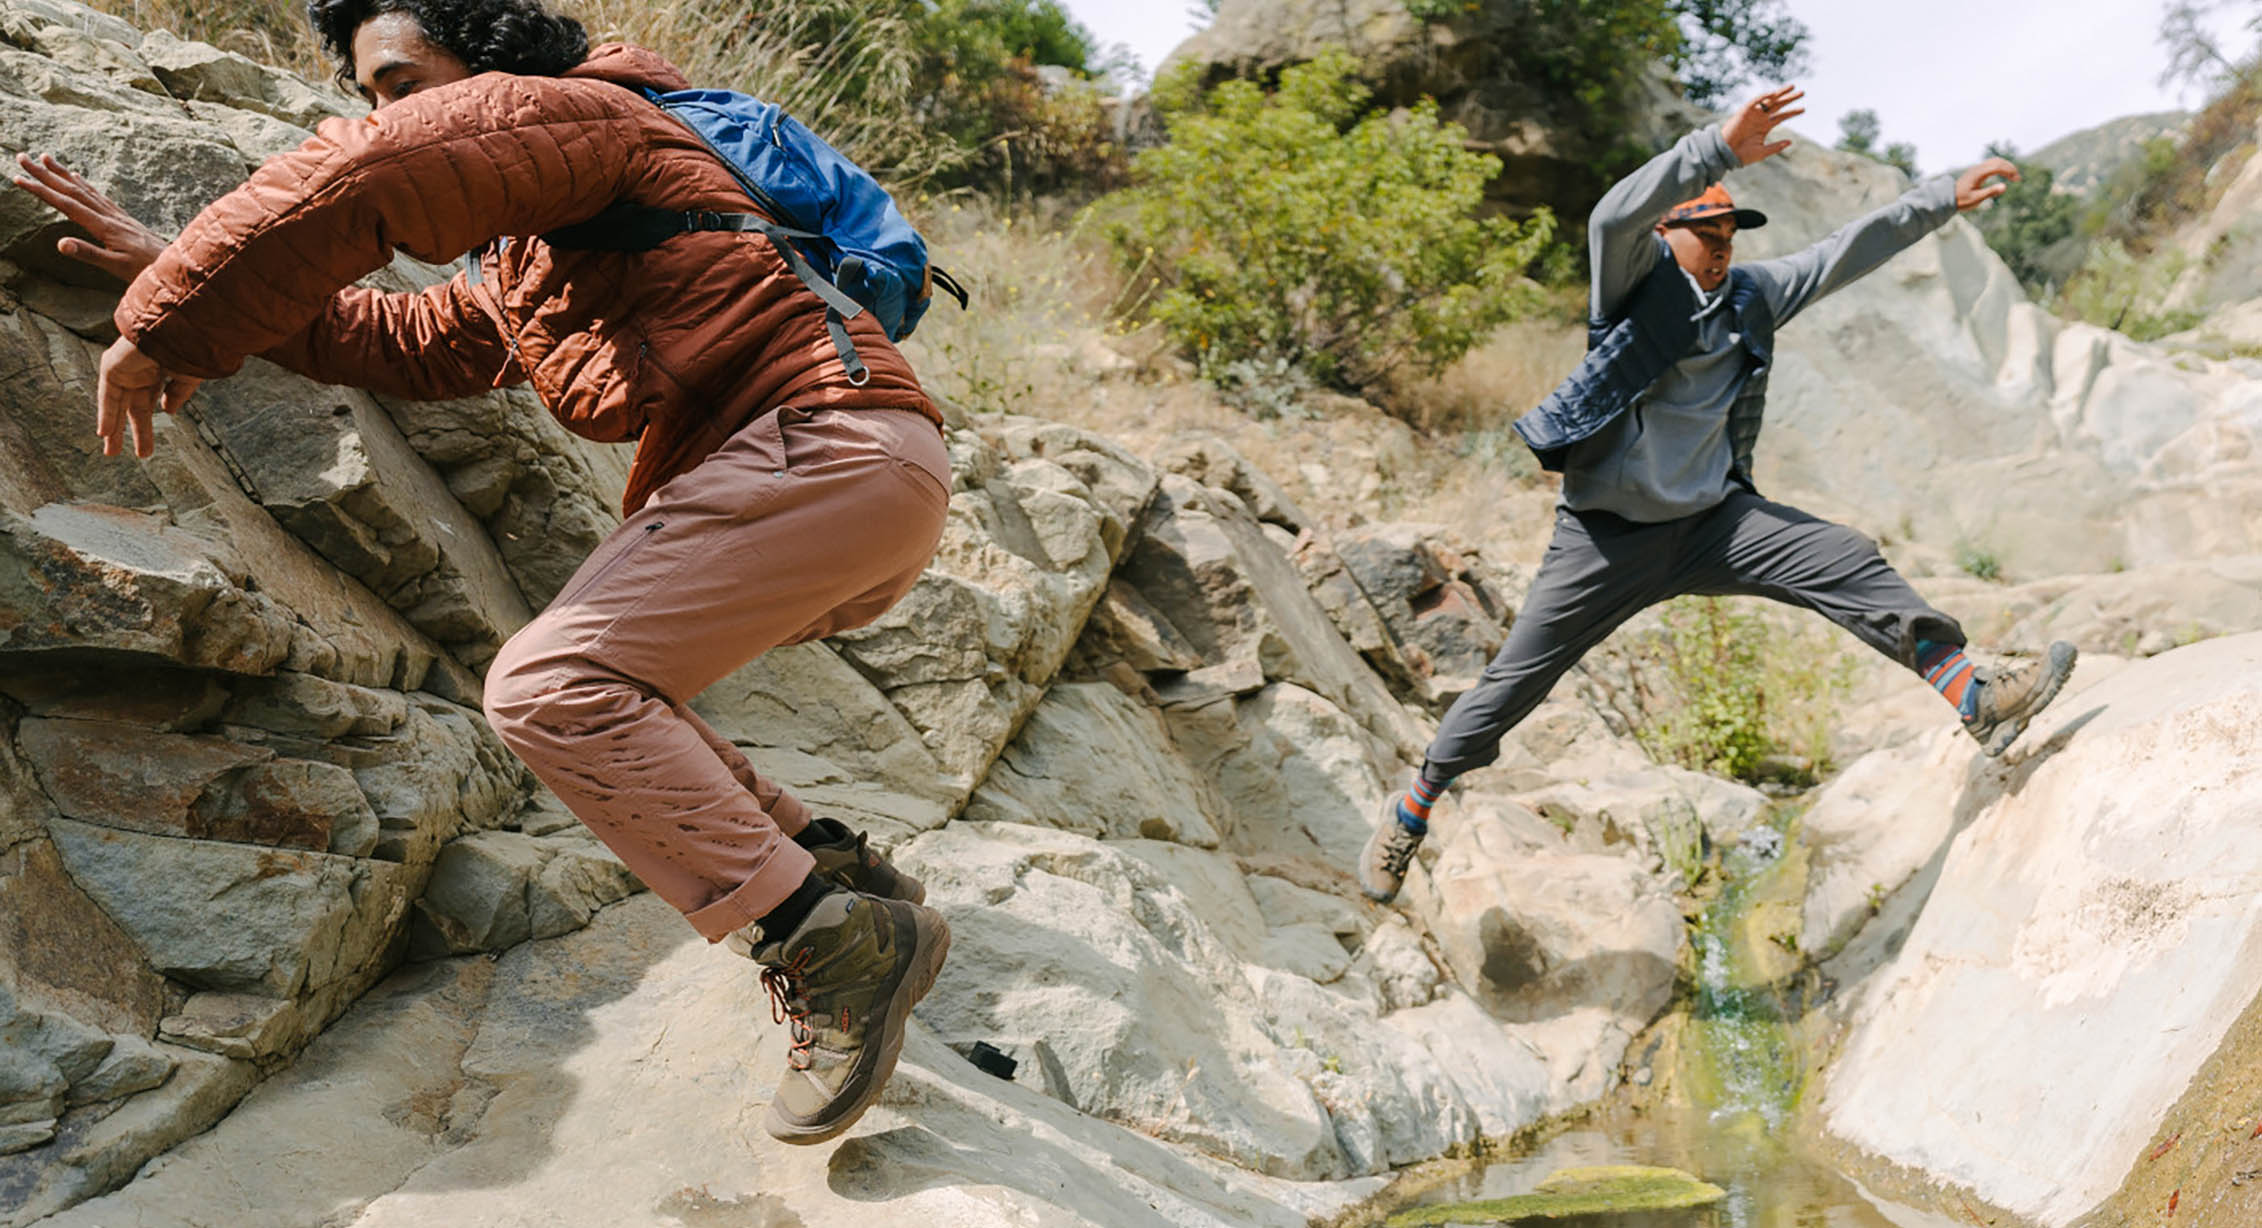 two people parkour their way up a rocky trail